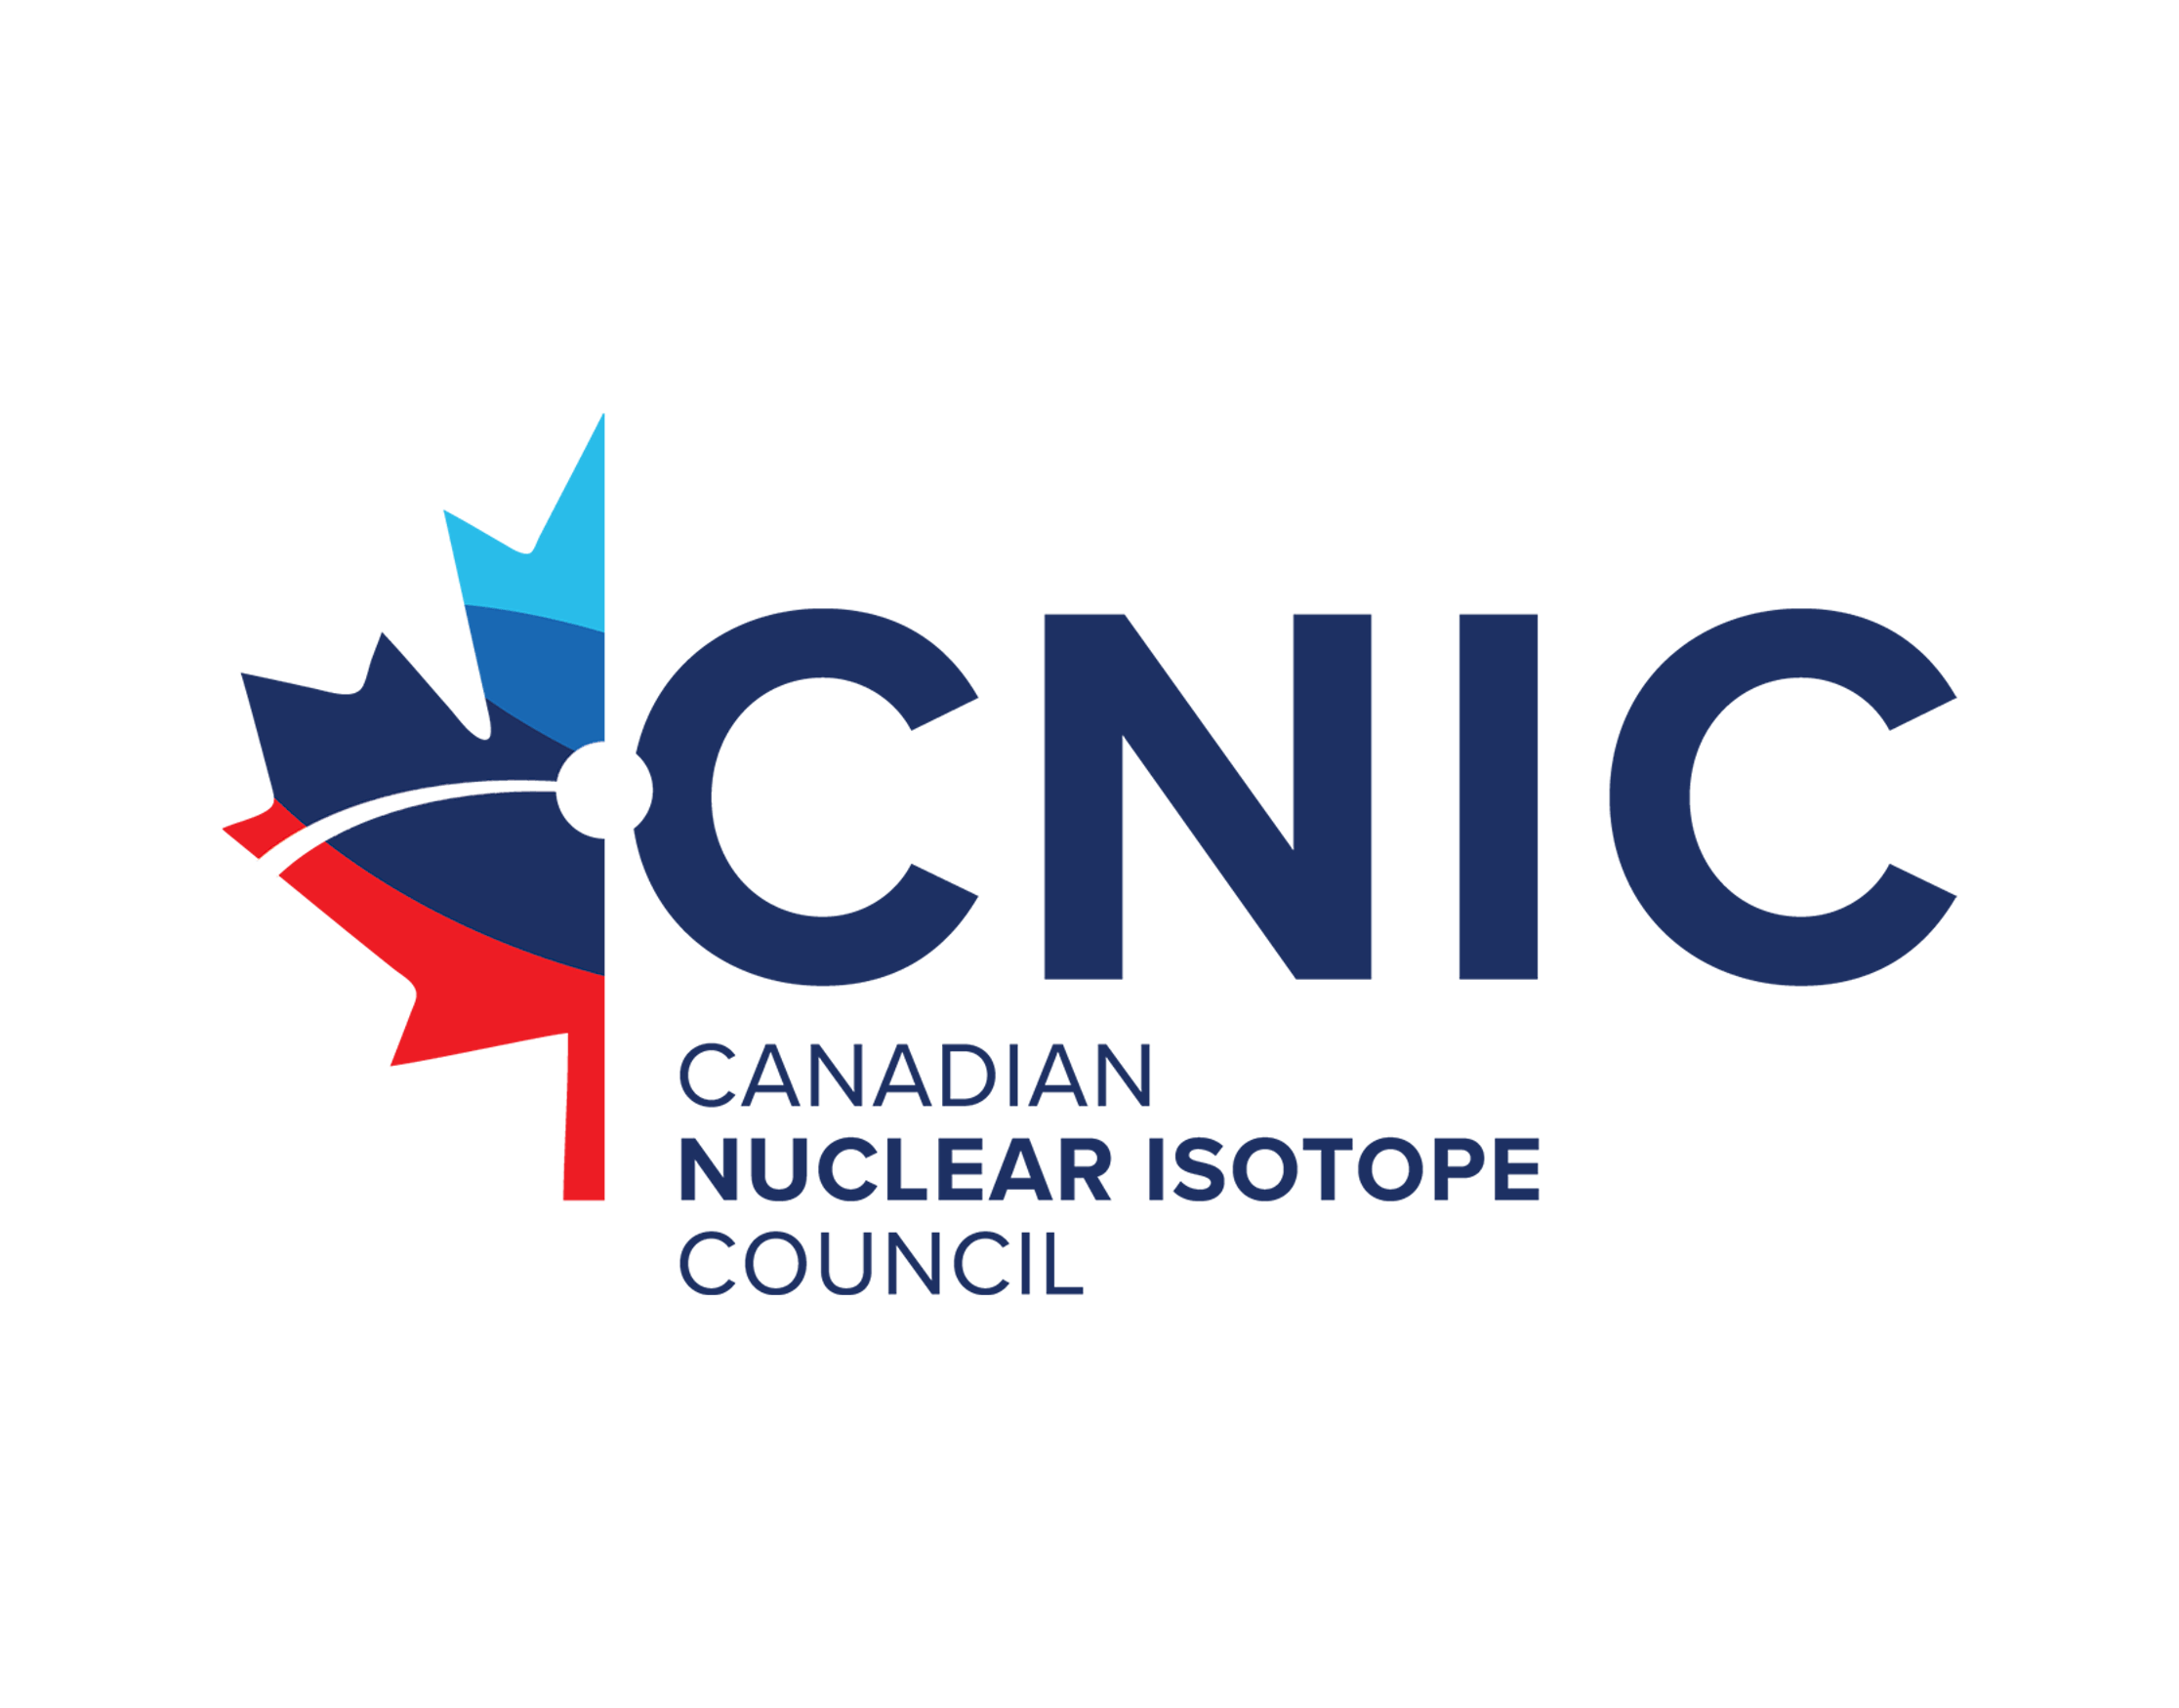 Canadian nuclear isotope council